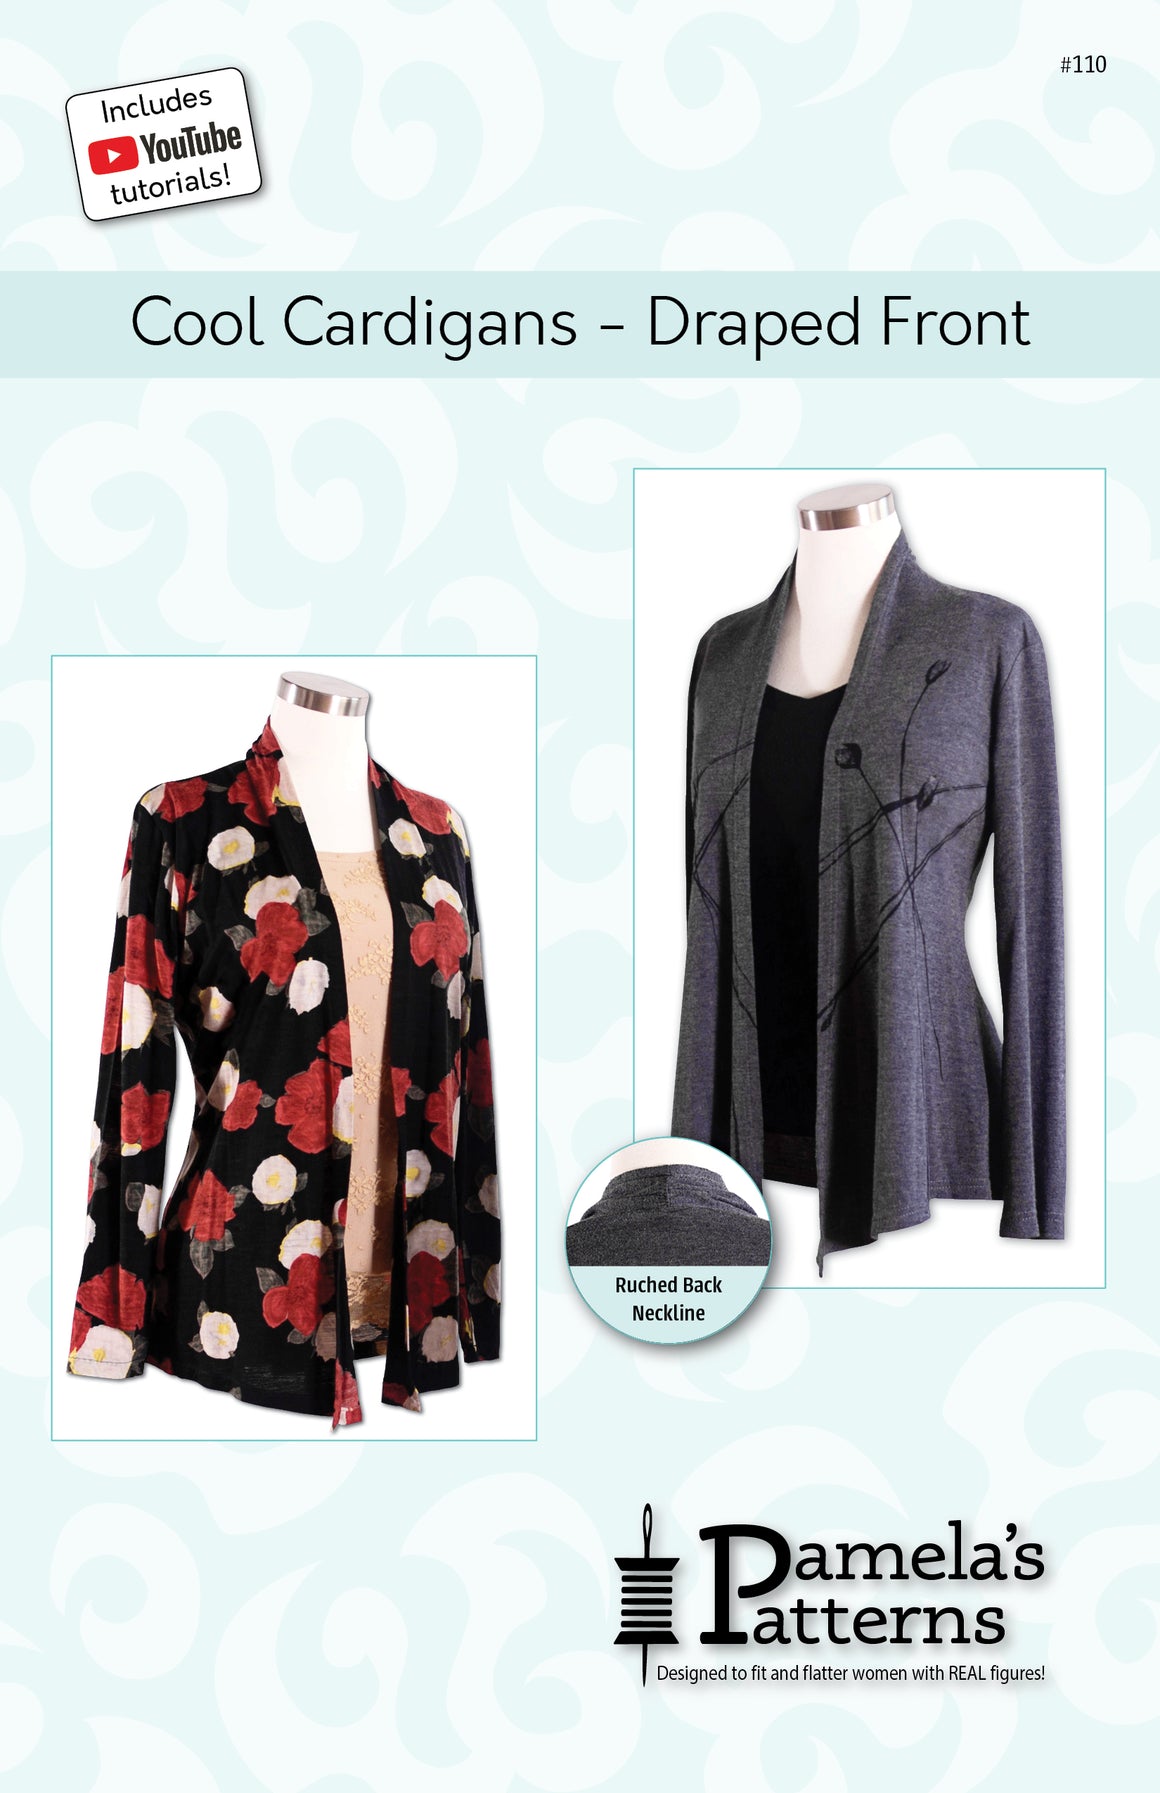 #110 - Cool Cardigan Draped Front